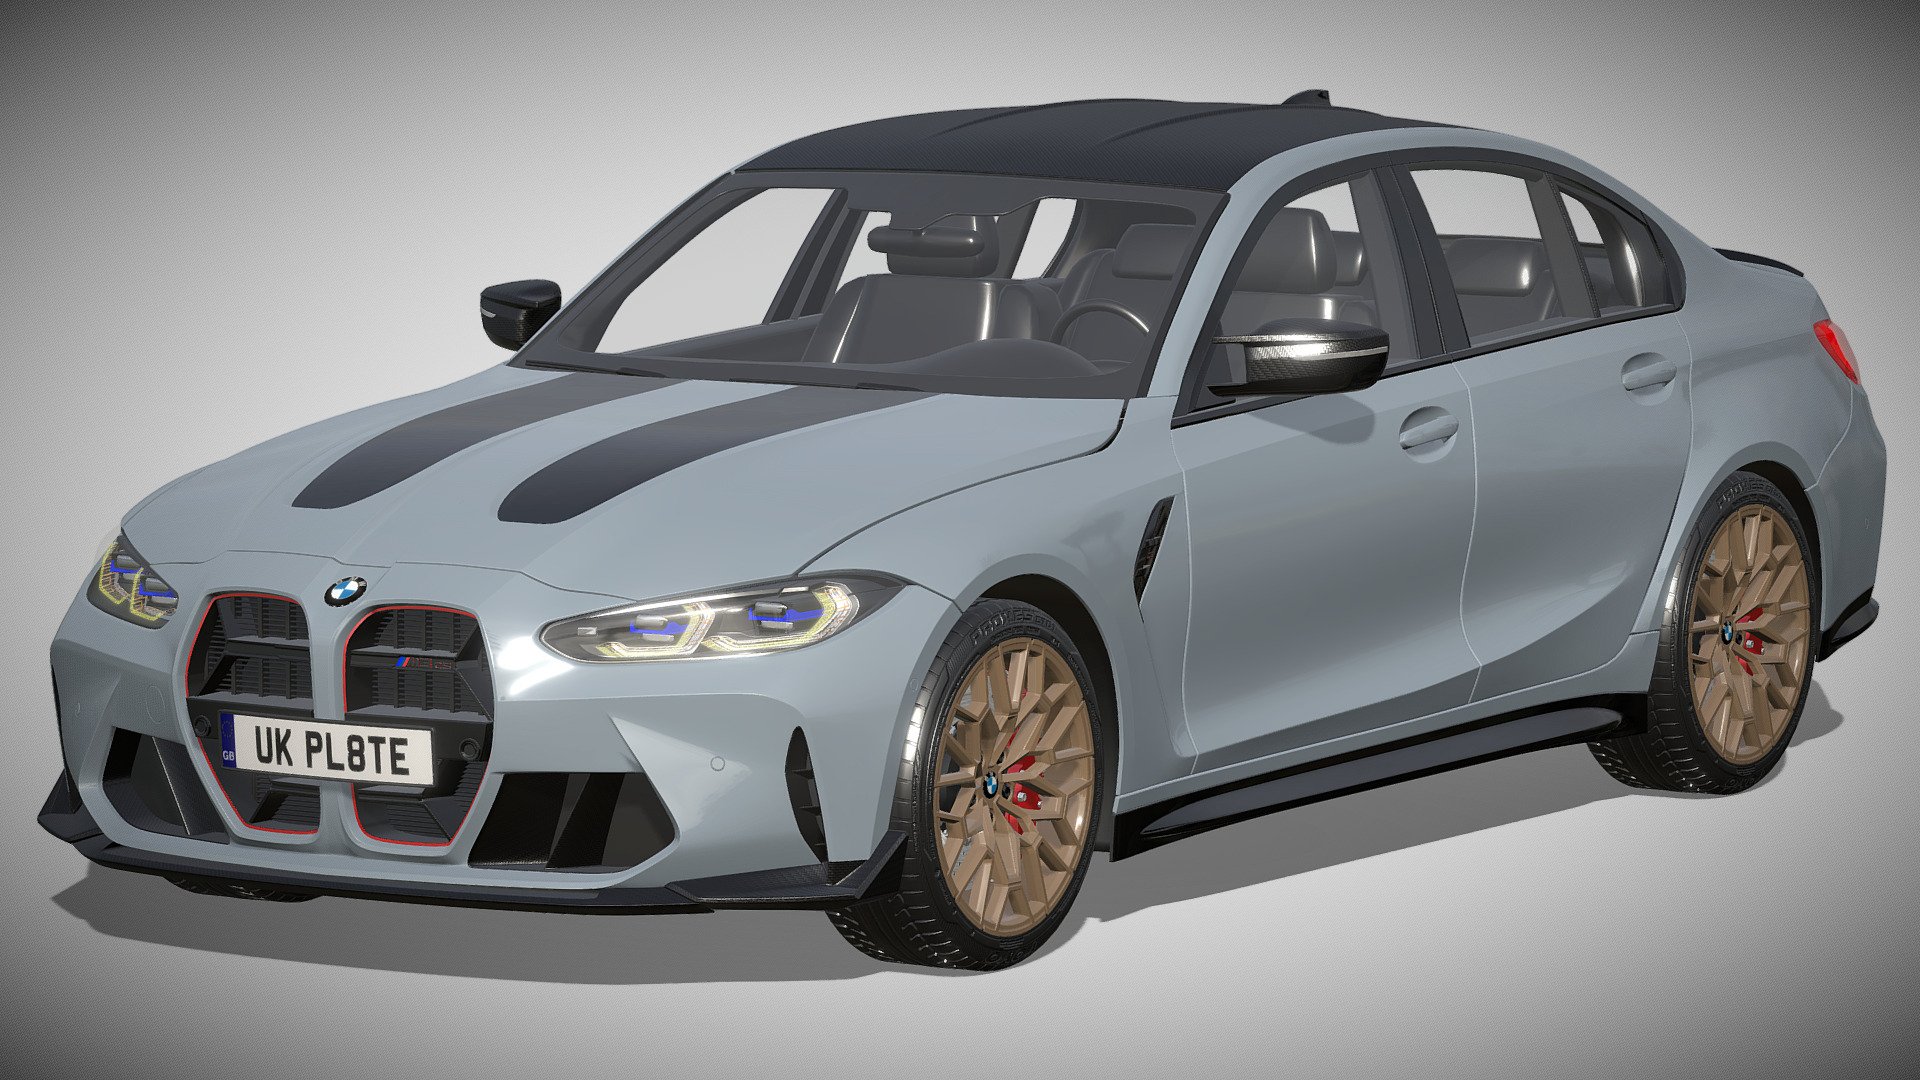 BMW M3 CS 2023

https://www.bmw.de/de/neufahrzeuge/m/m3-limousine/2023/bmw-3er-limousine-m-automobile-ueberblick.html

Clean geometry Light weight model, yet completely detailed for HI-Res renders. Use for movies, Advertisements or games

Corona render and materials

All textures include in *.rar files

Lighting setup is not included in the file! - BMW M3 CS 2023 - Buy Royalty Free 3D model by zifir3d 3d model